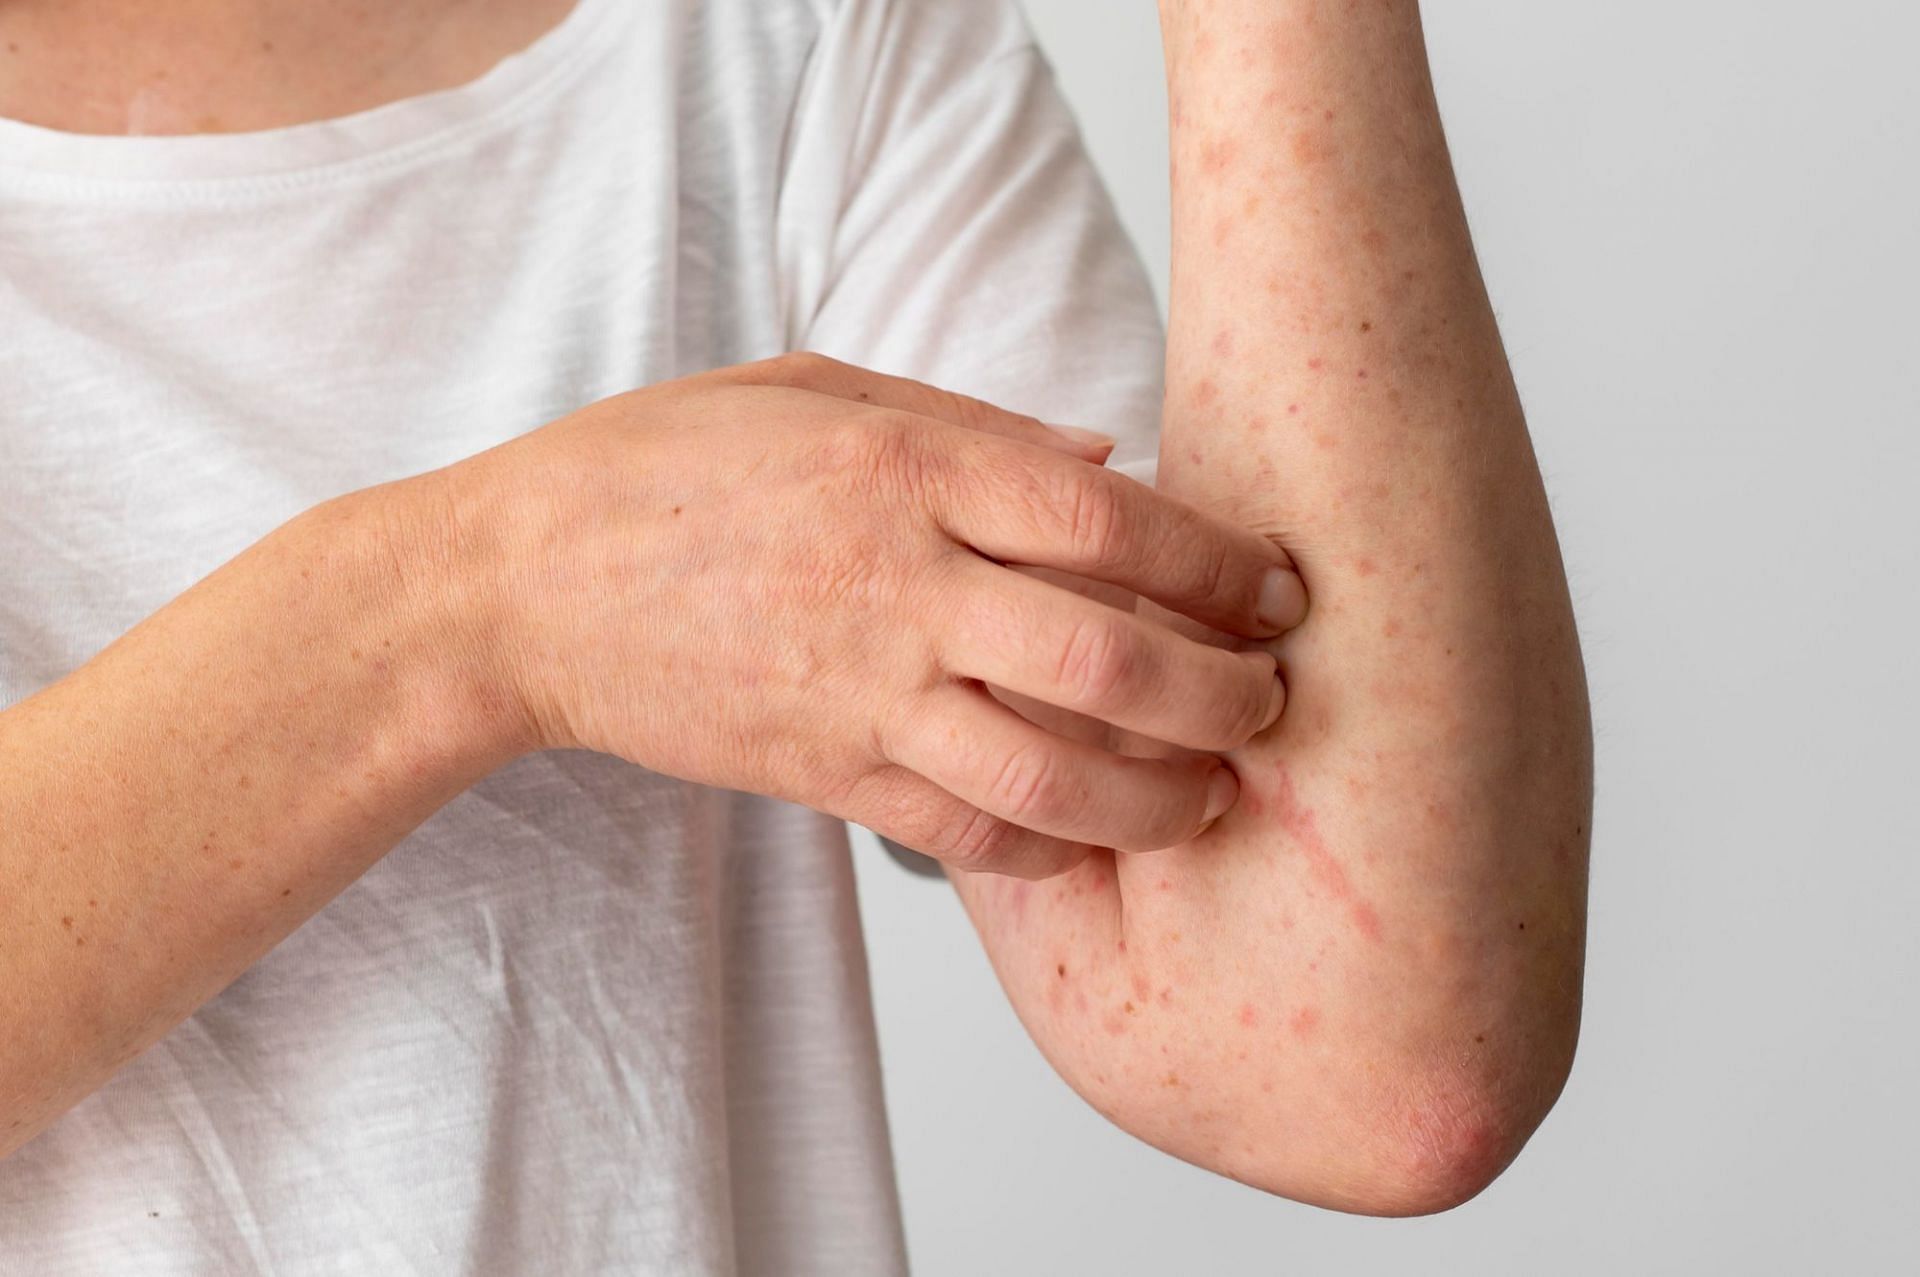 Topical application may prevent skin infections. (Photo via Freepik)